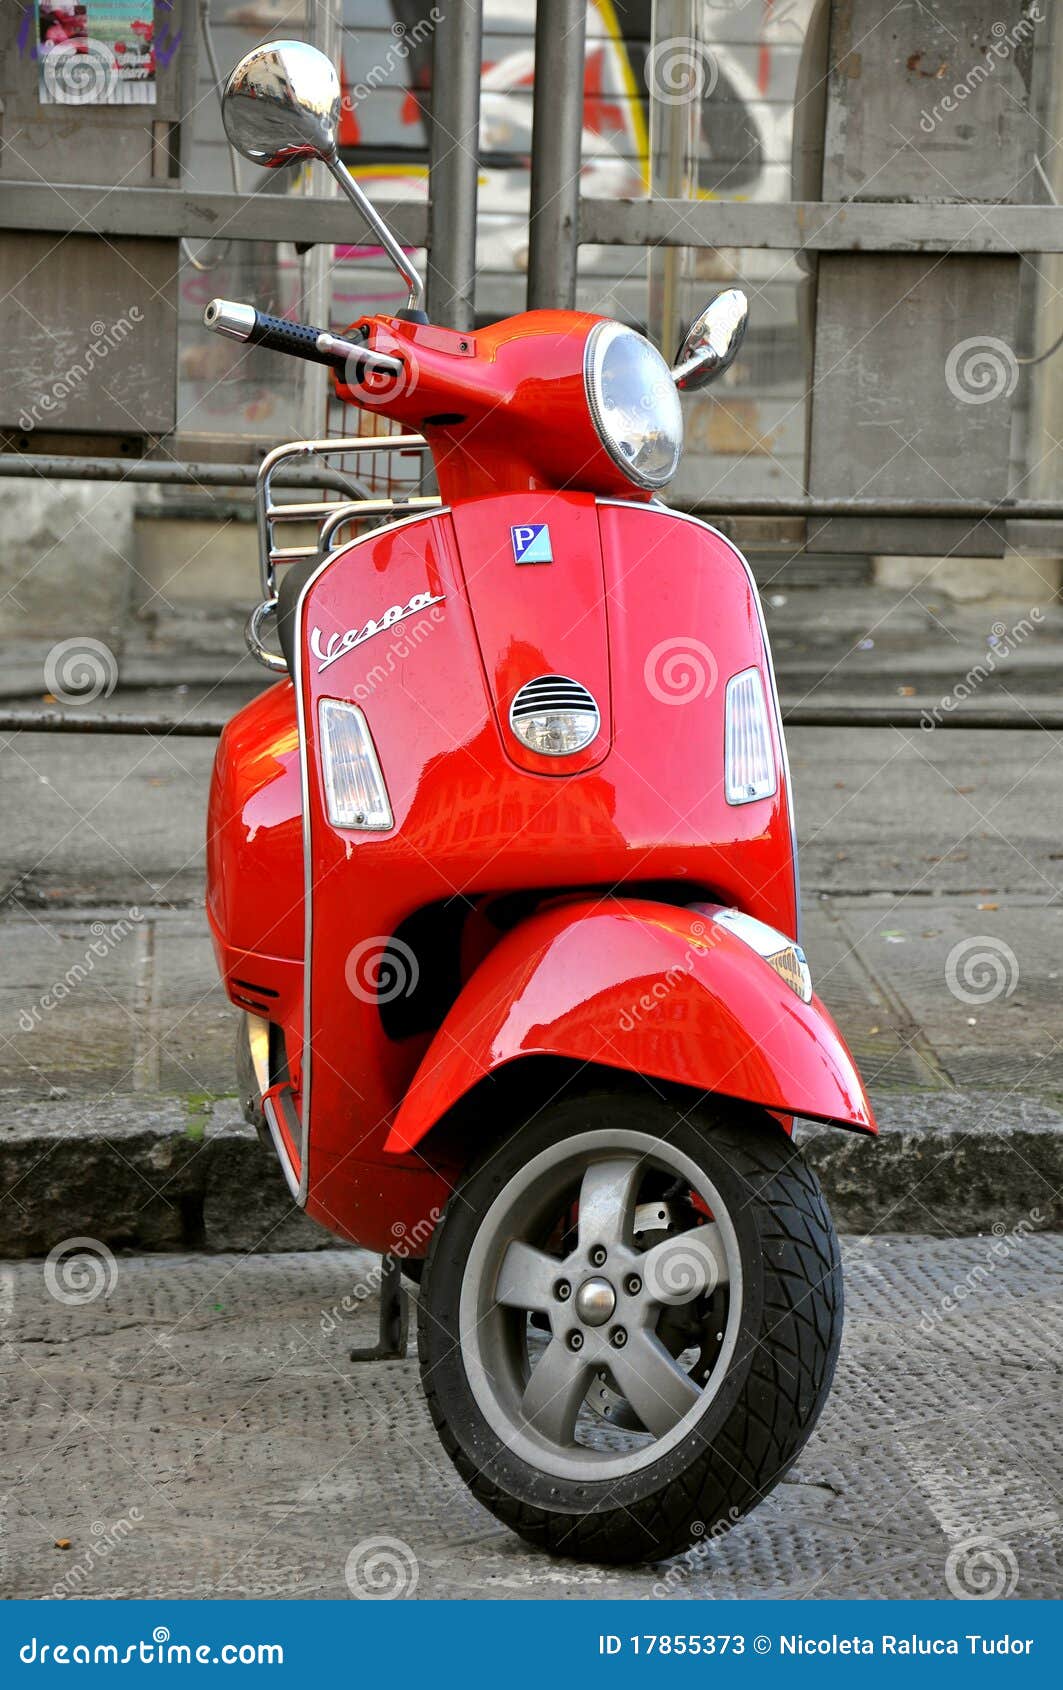 Icon: Vespa Scooter Editorial Stock Image of greece, 17855373